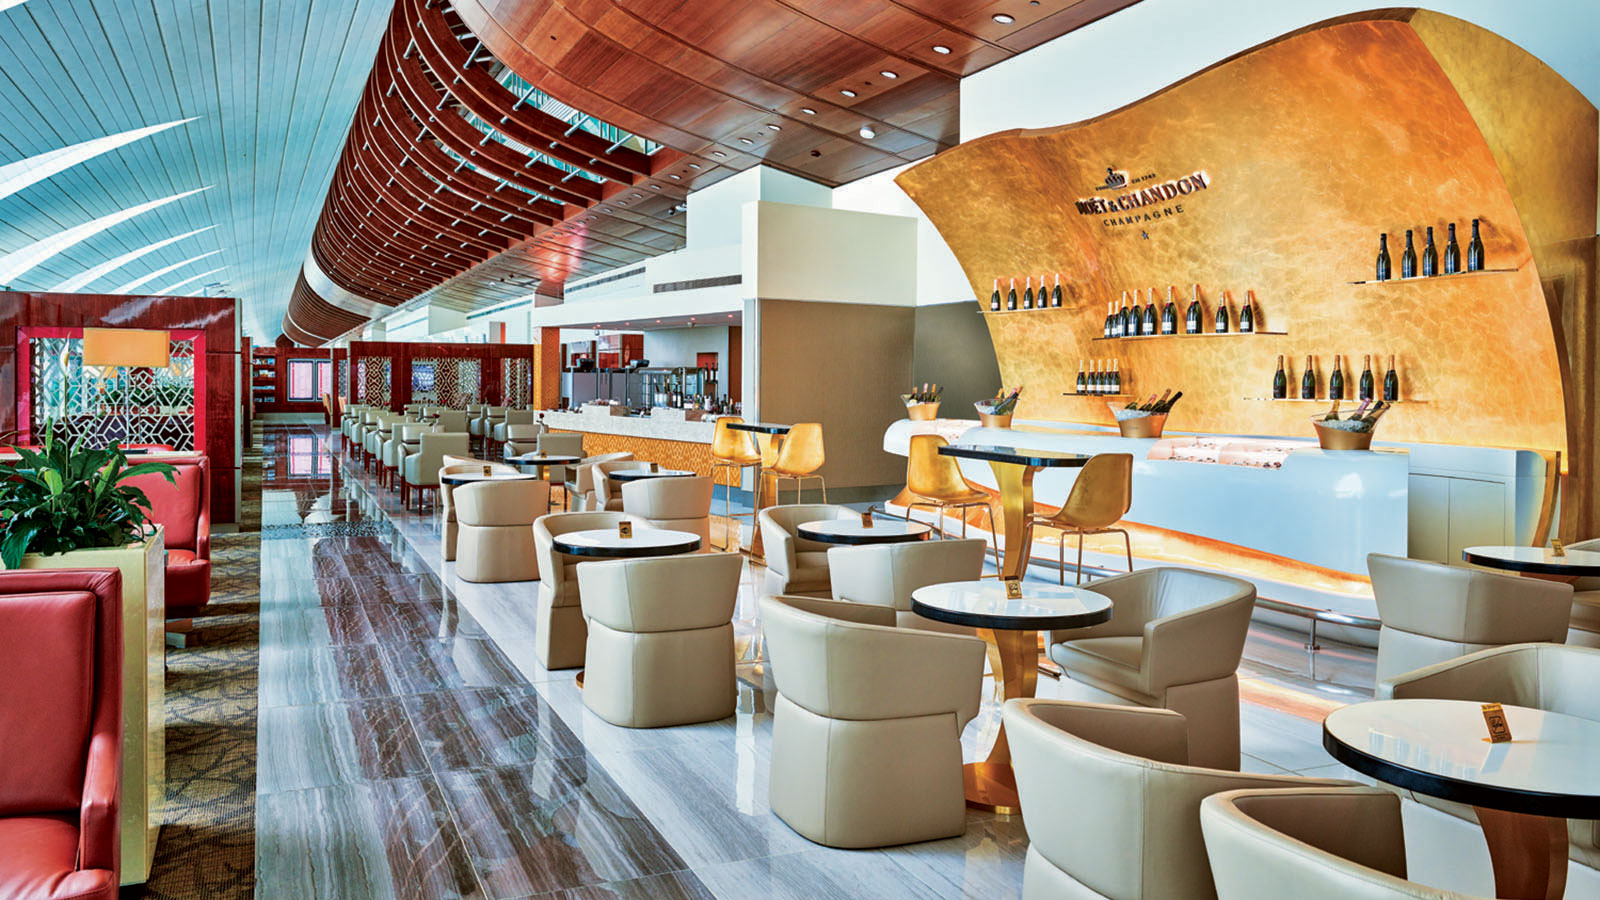 Emirates Business Class lounge, open to Qantas members